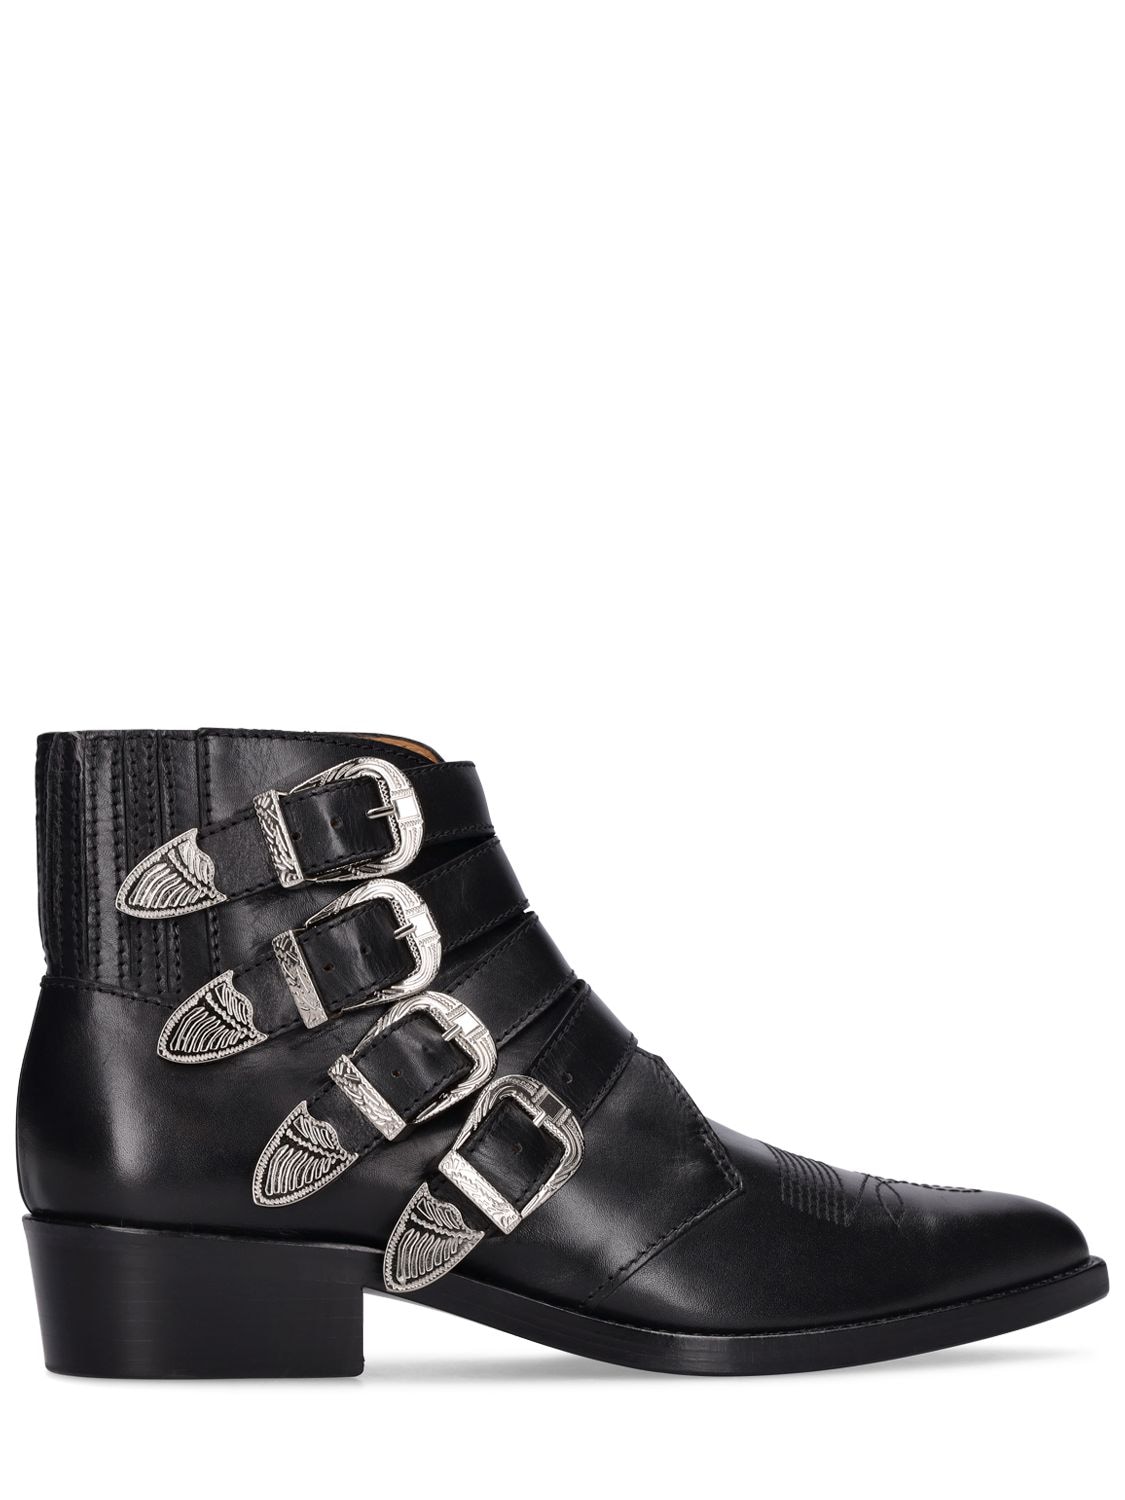 TOGA VIRILIS LEATHER BOOTS W/ SILVER BUCKLES